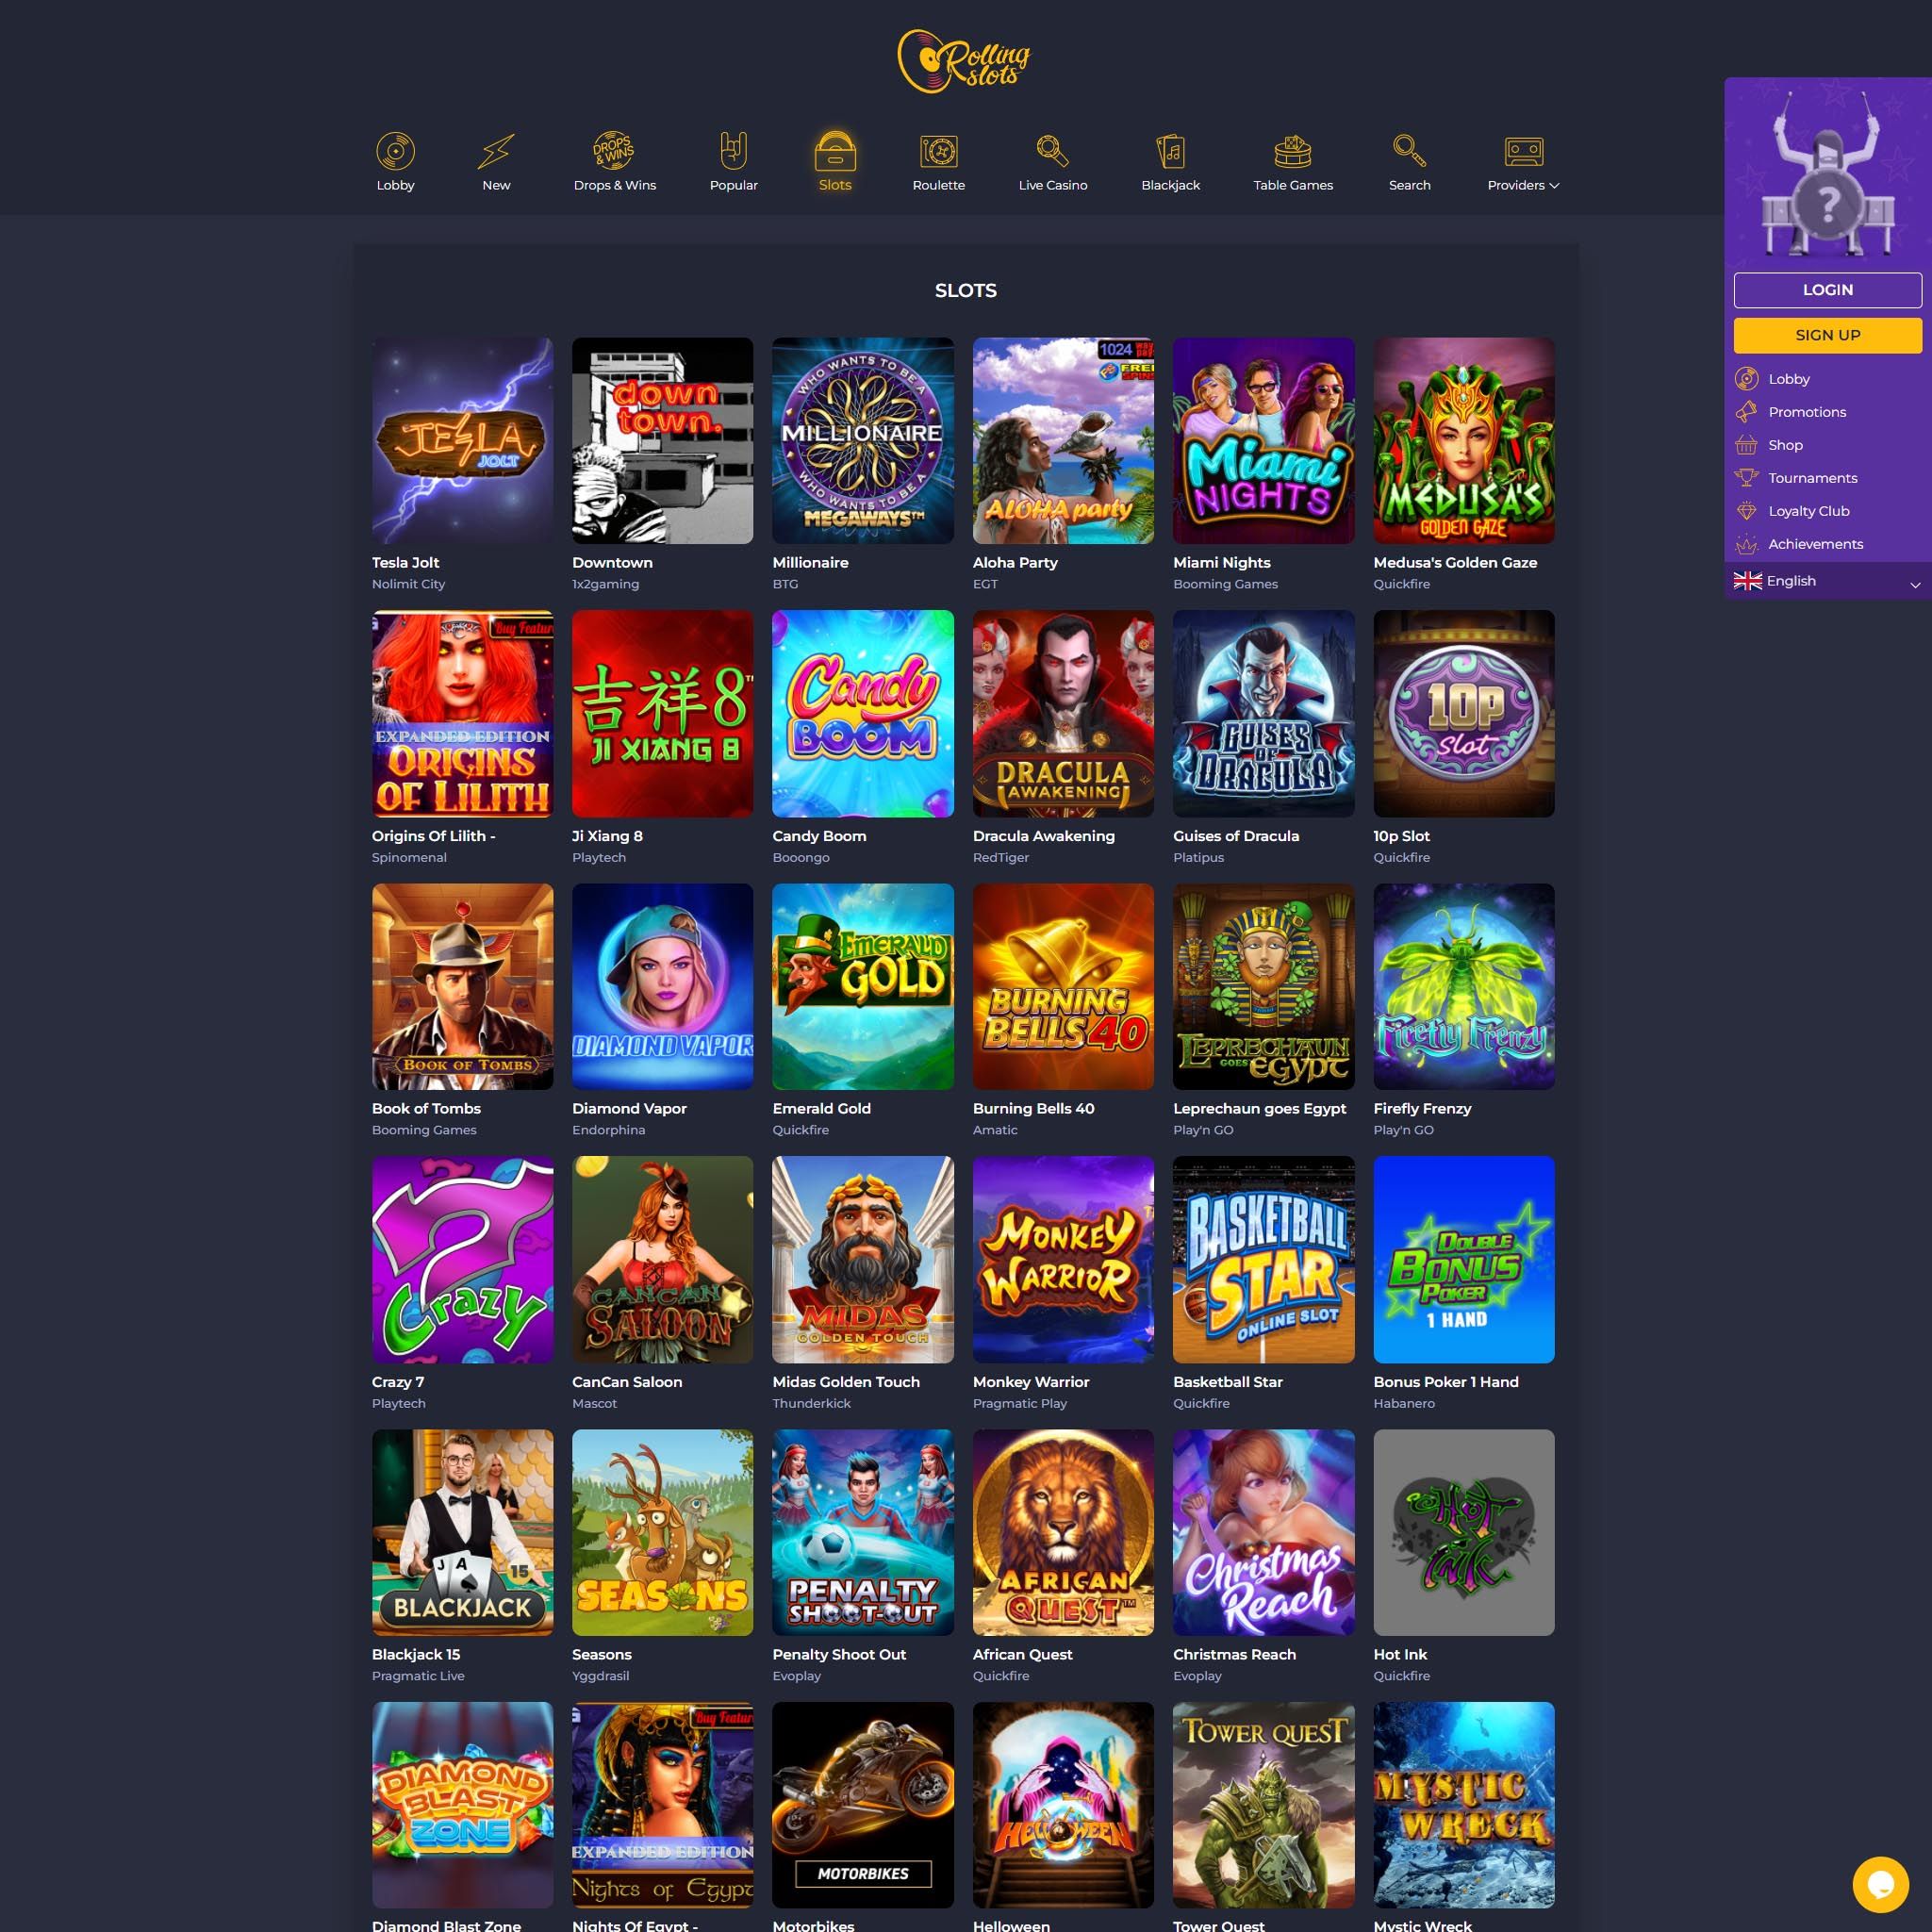 Rolling Slots full games catalogue